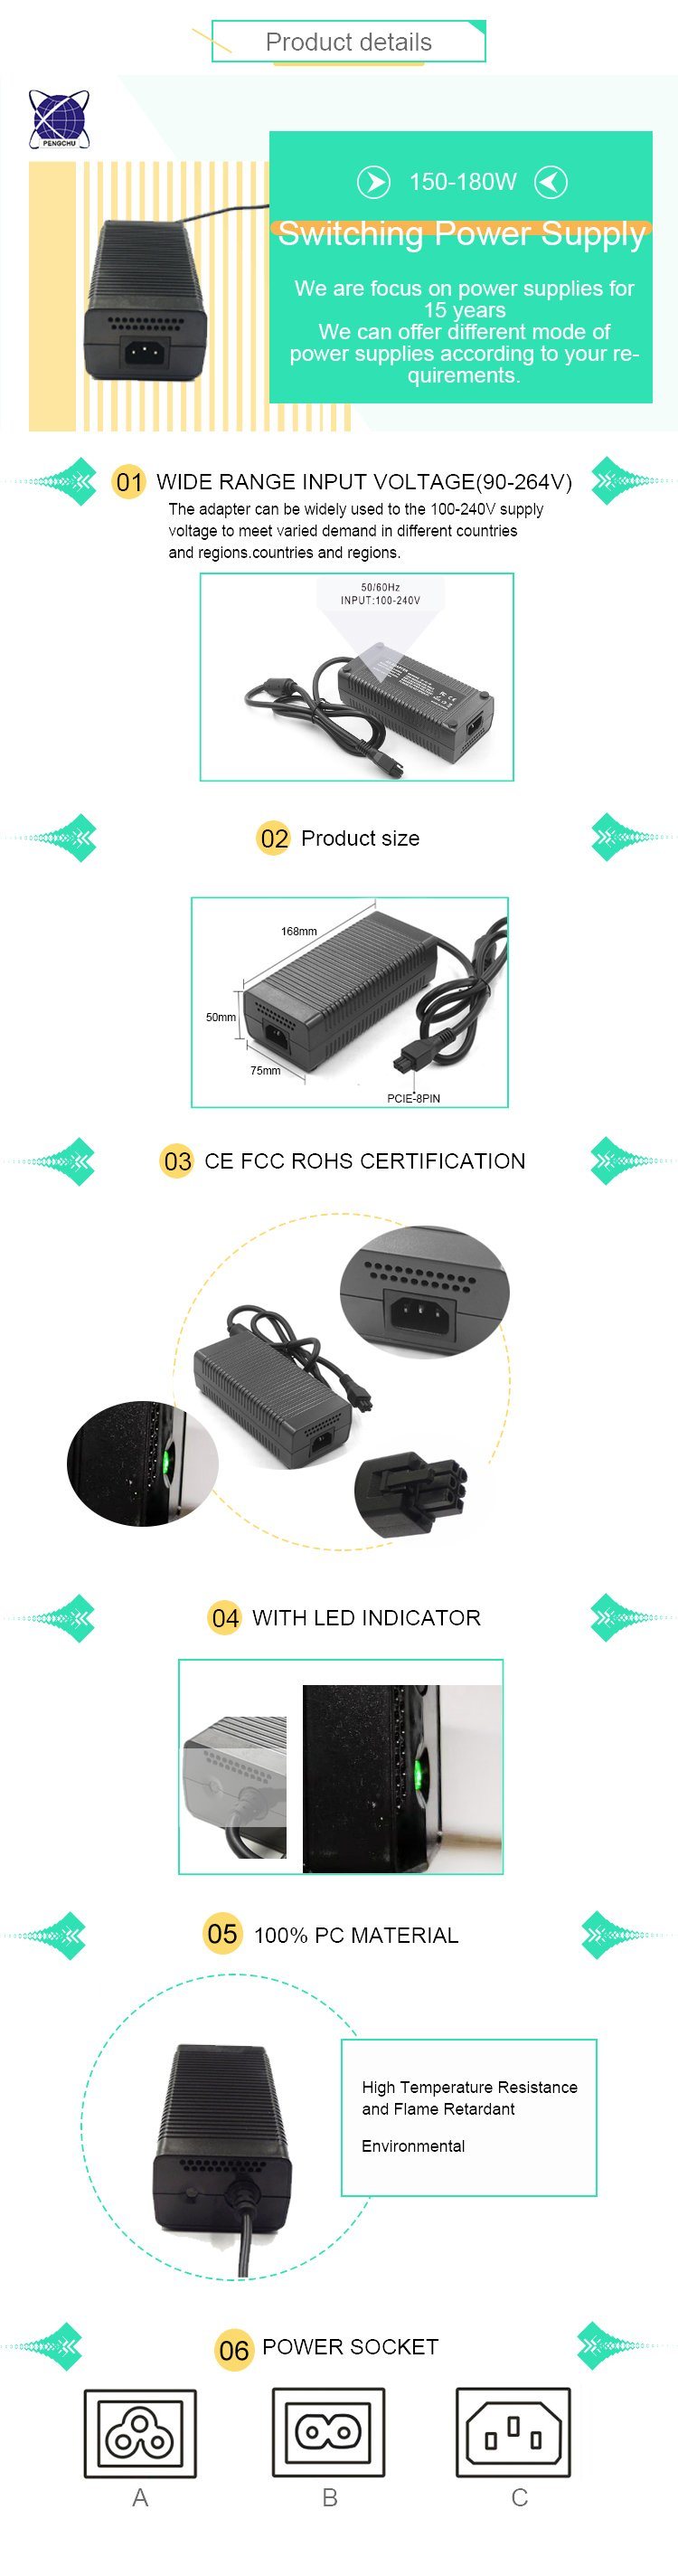 12V 15A 180W AC DC Switching Power Adapter with CE FCC RoHS